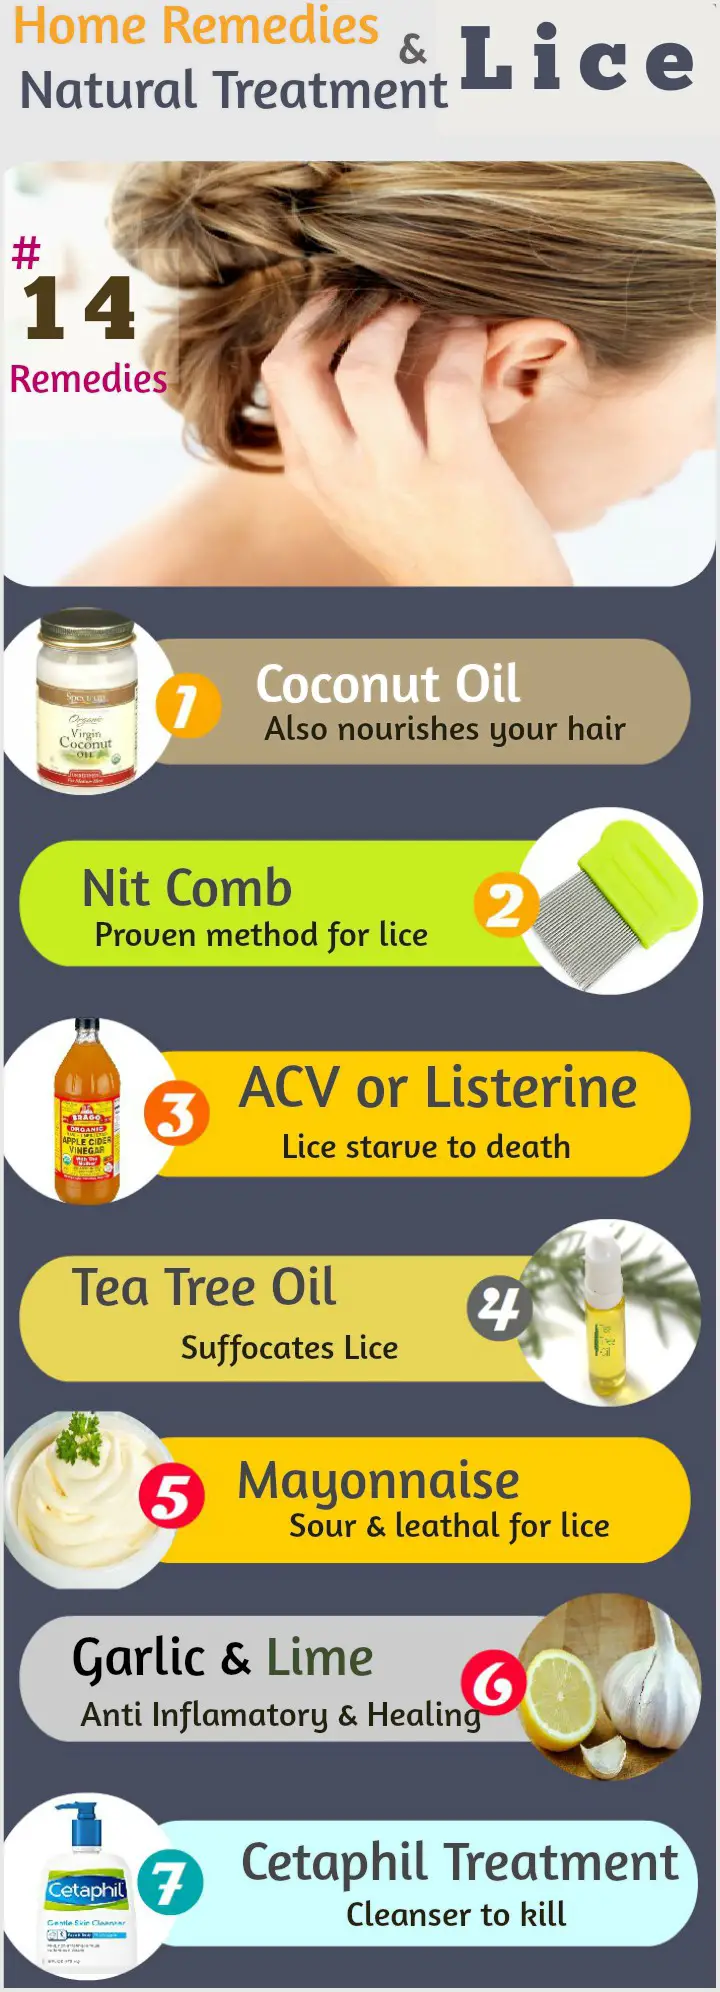 How to Get Rid of Lice 14 Home Remedies and Natural Lice